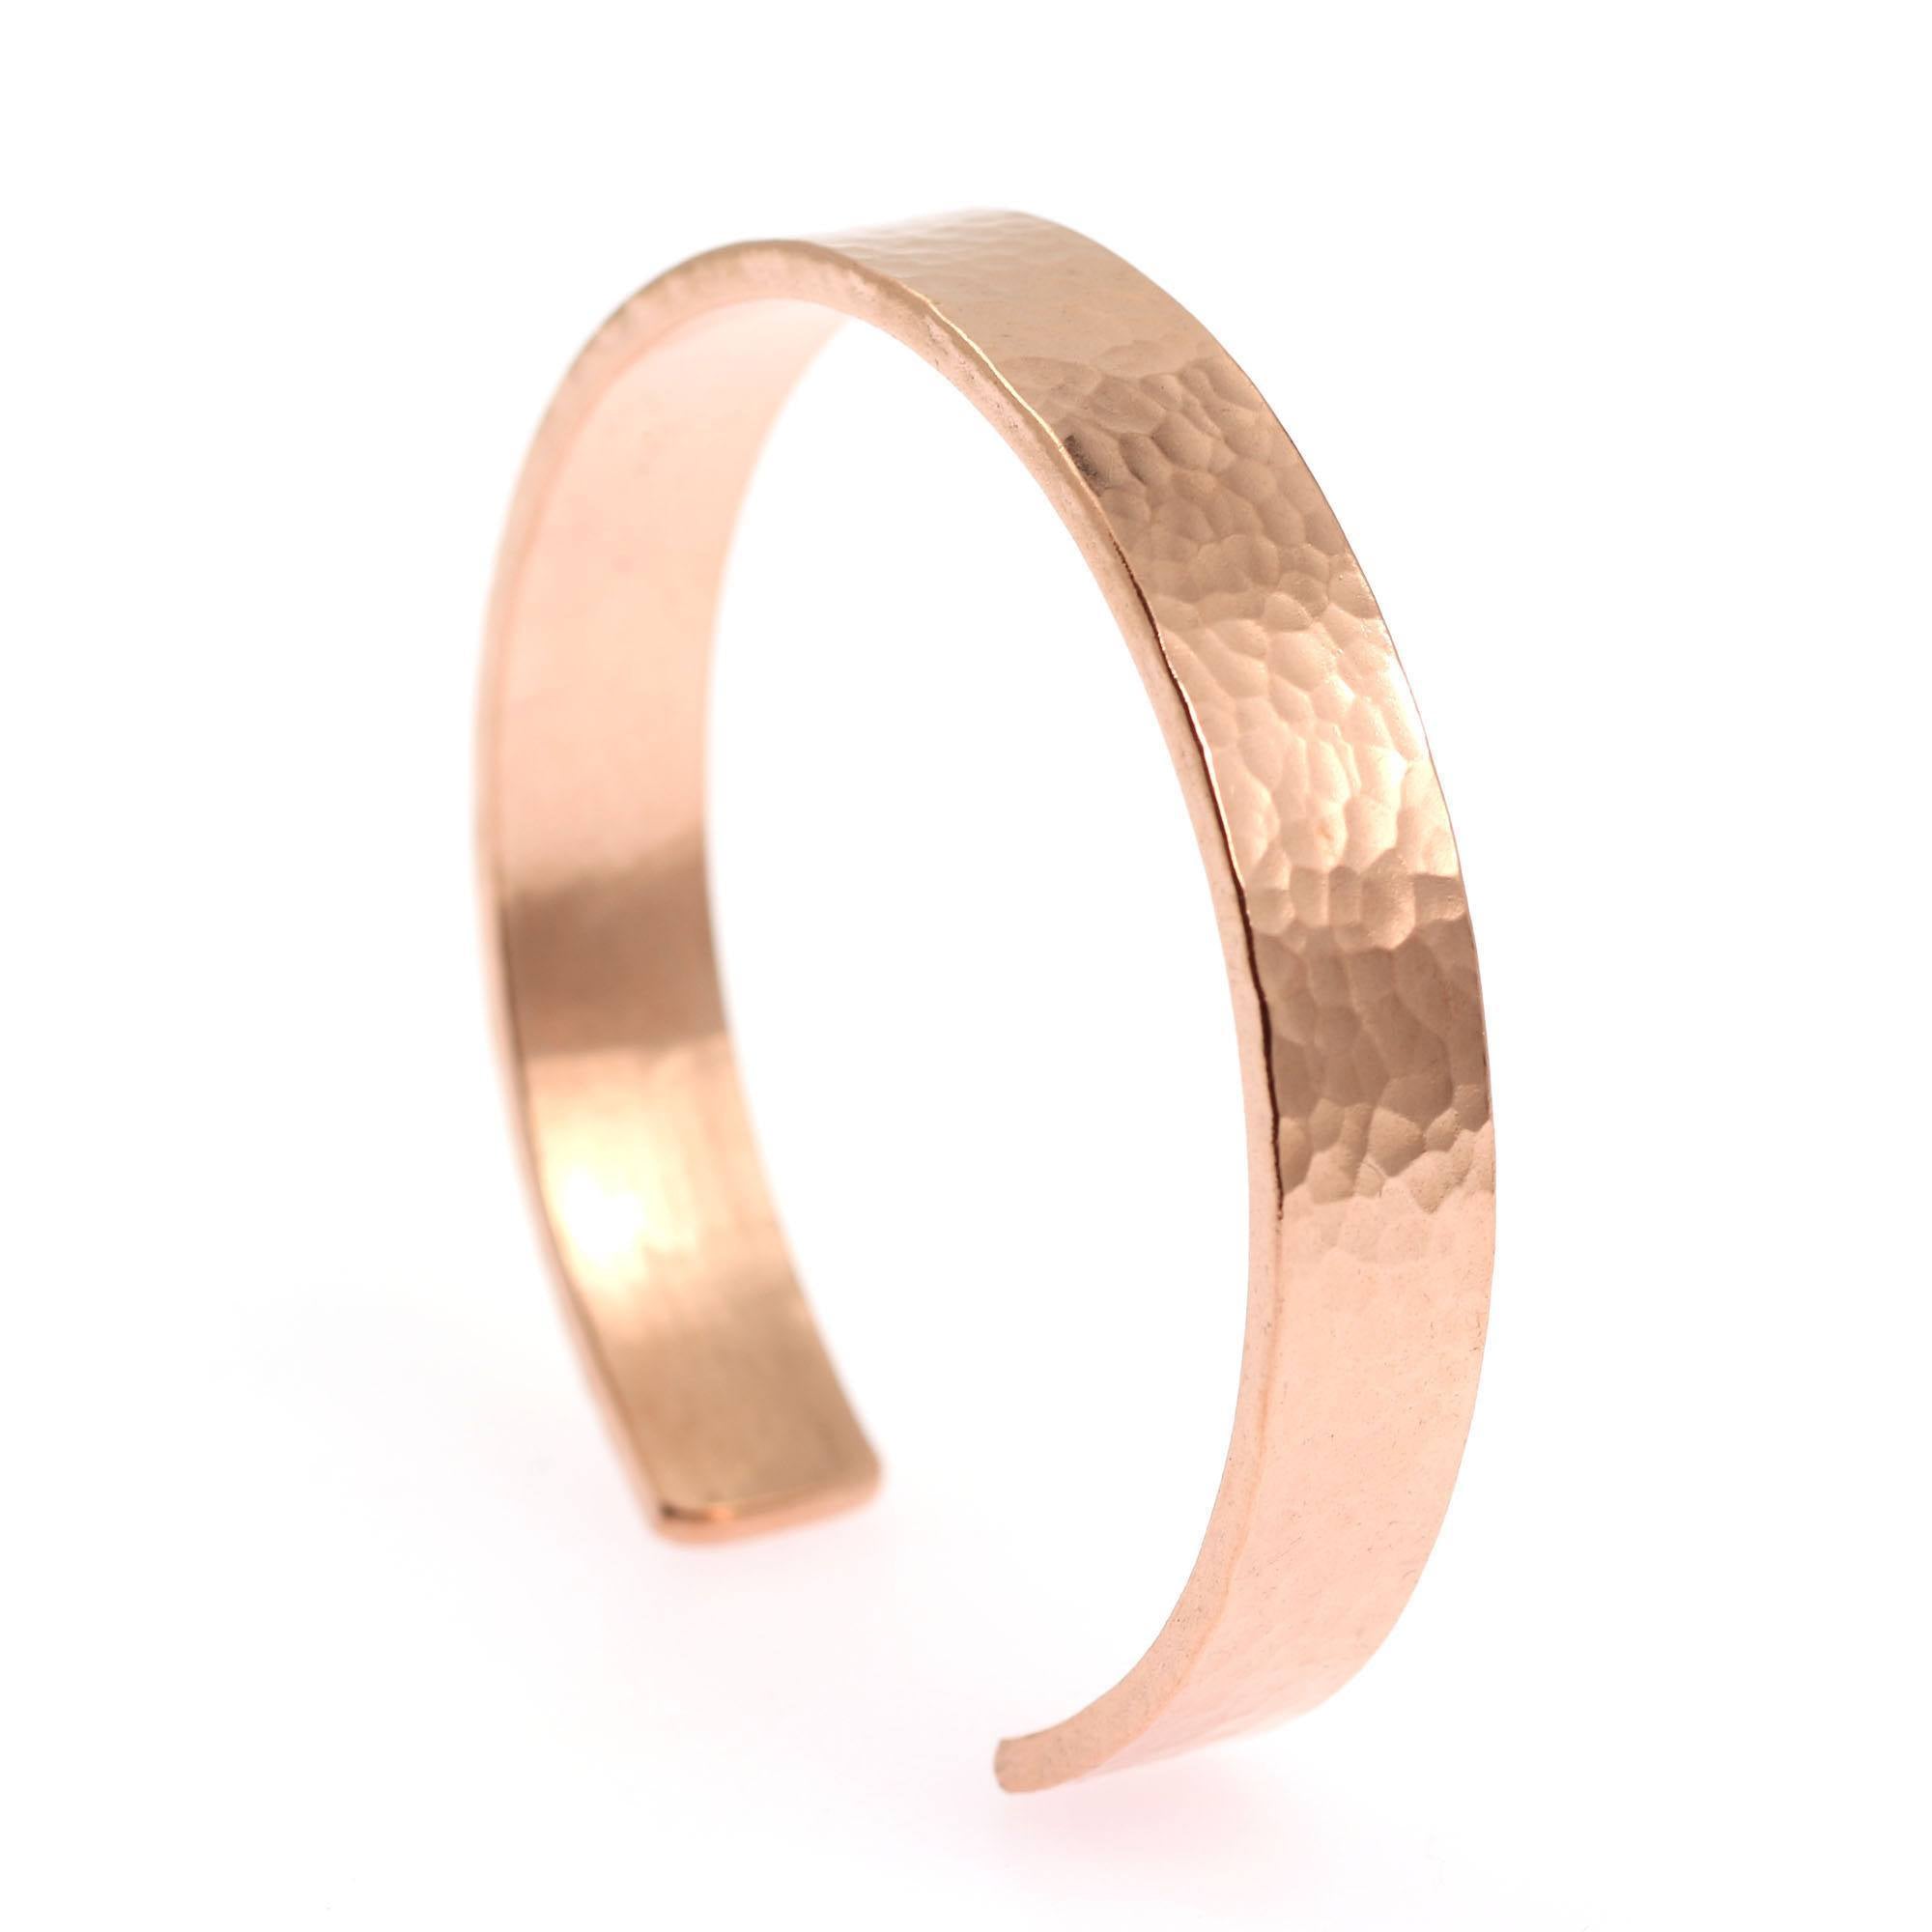 10mm Wide Hammered Copper Cuff Bracelet Right View